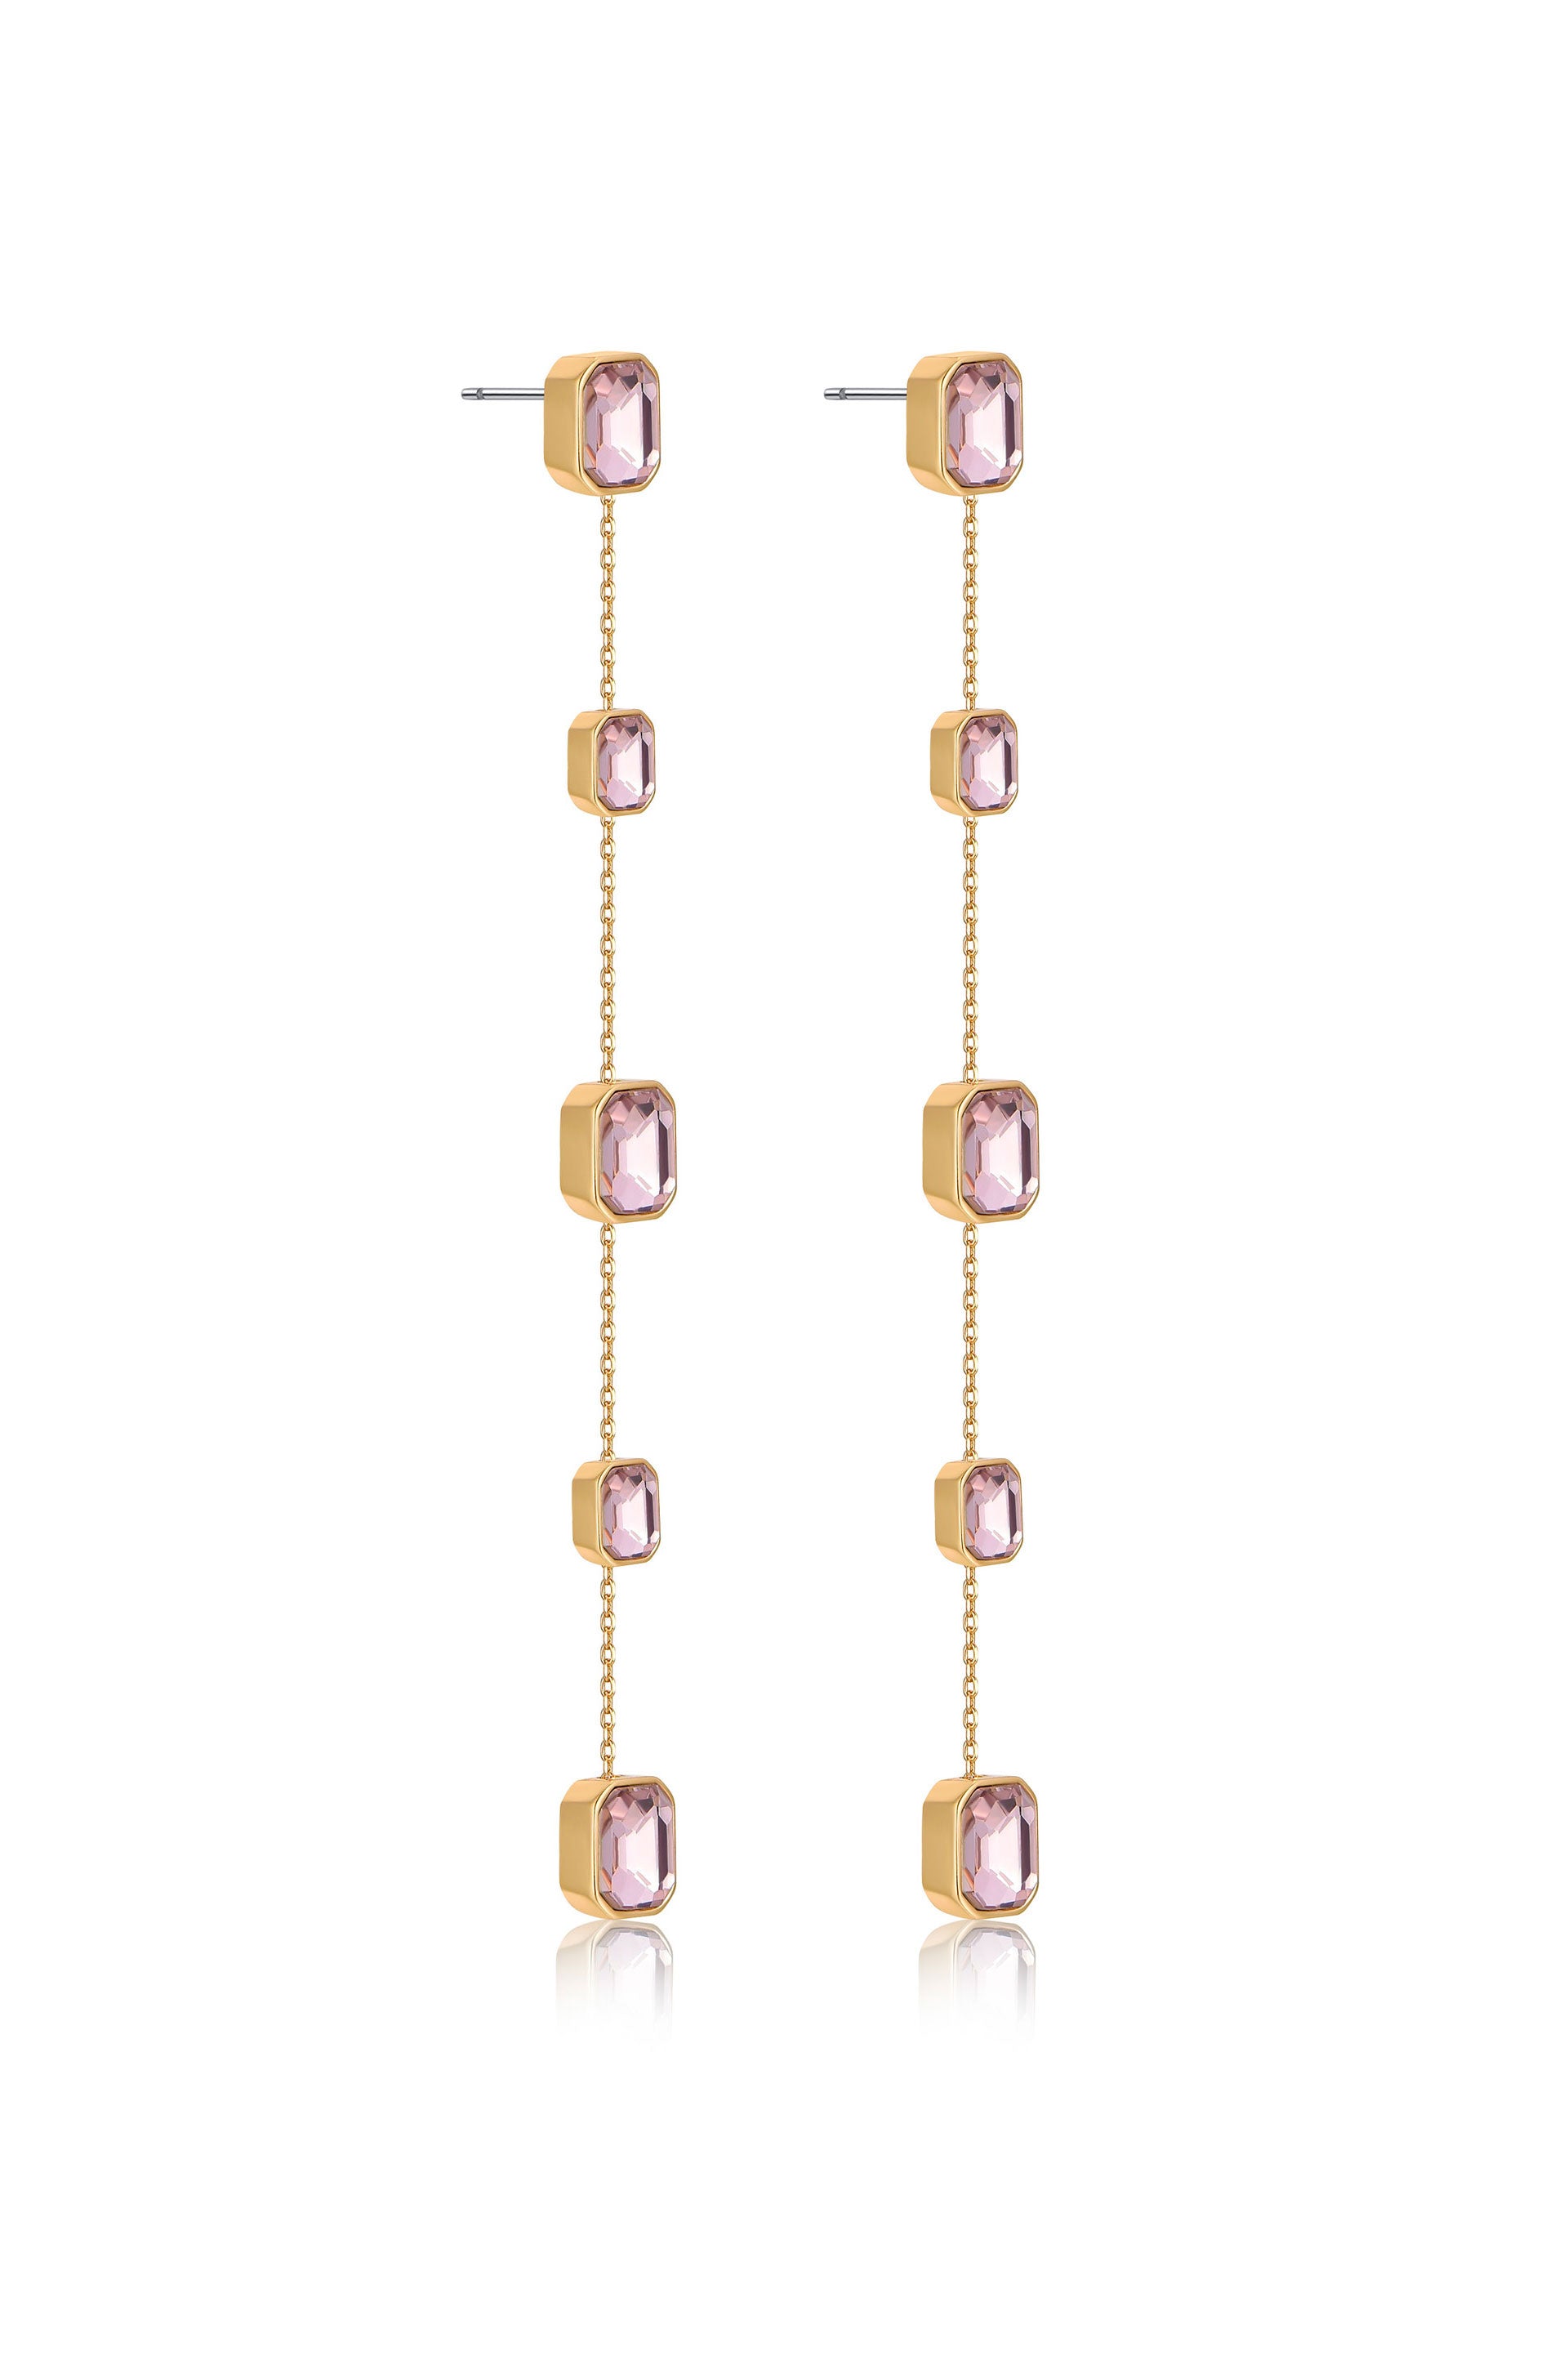 Iconic Crystal Dangle Earrings in light rose crystals facing side